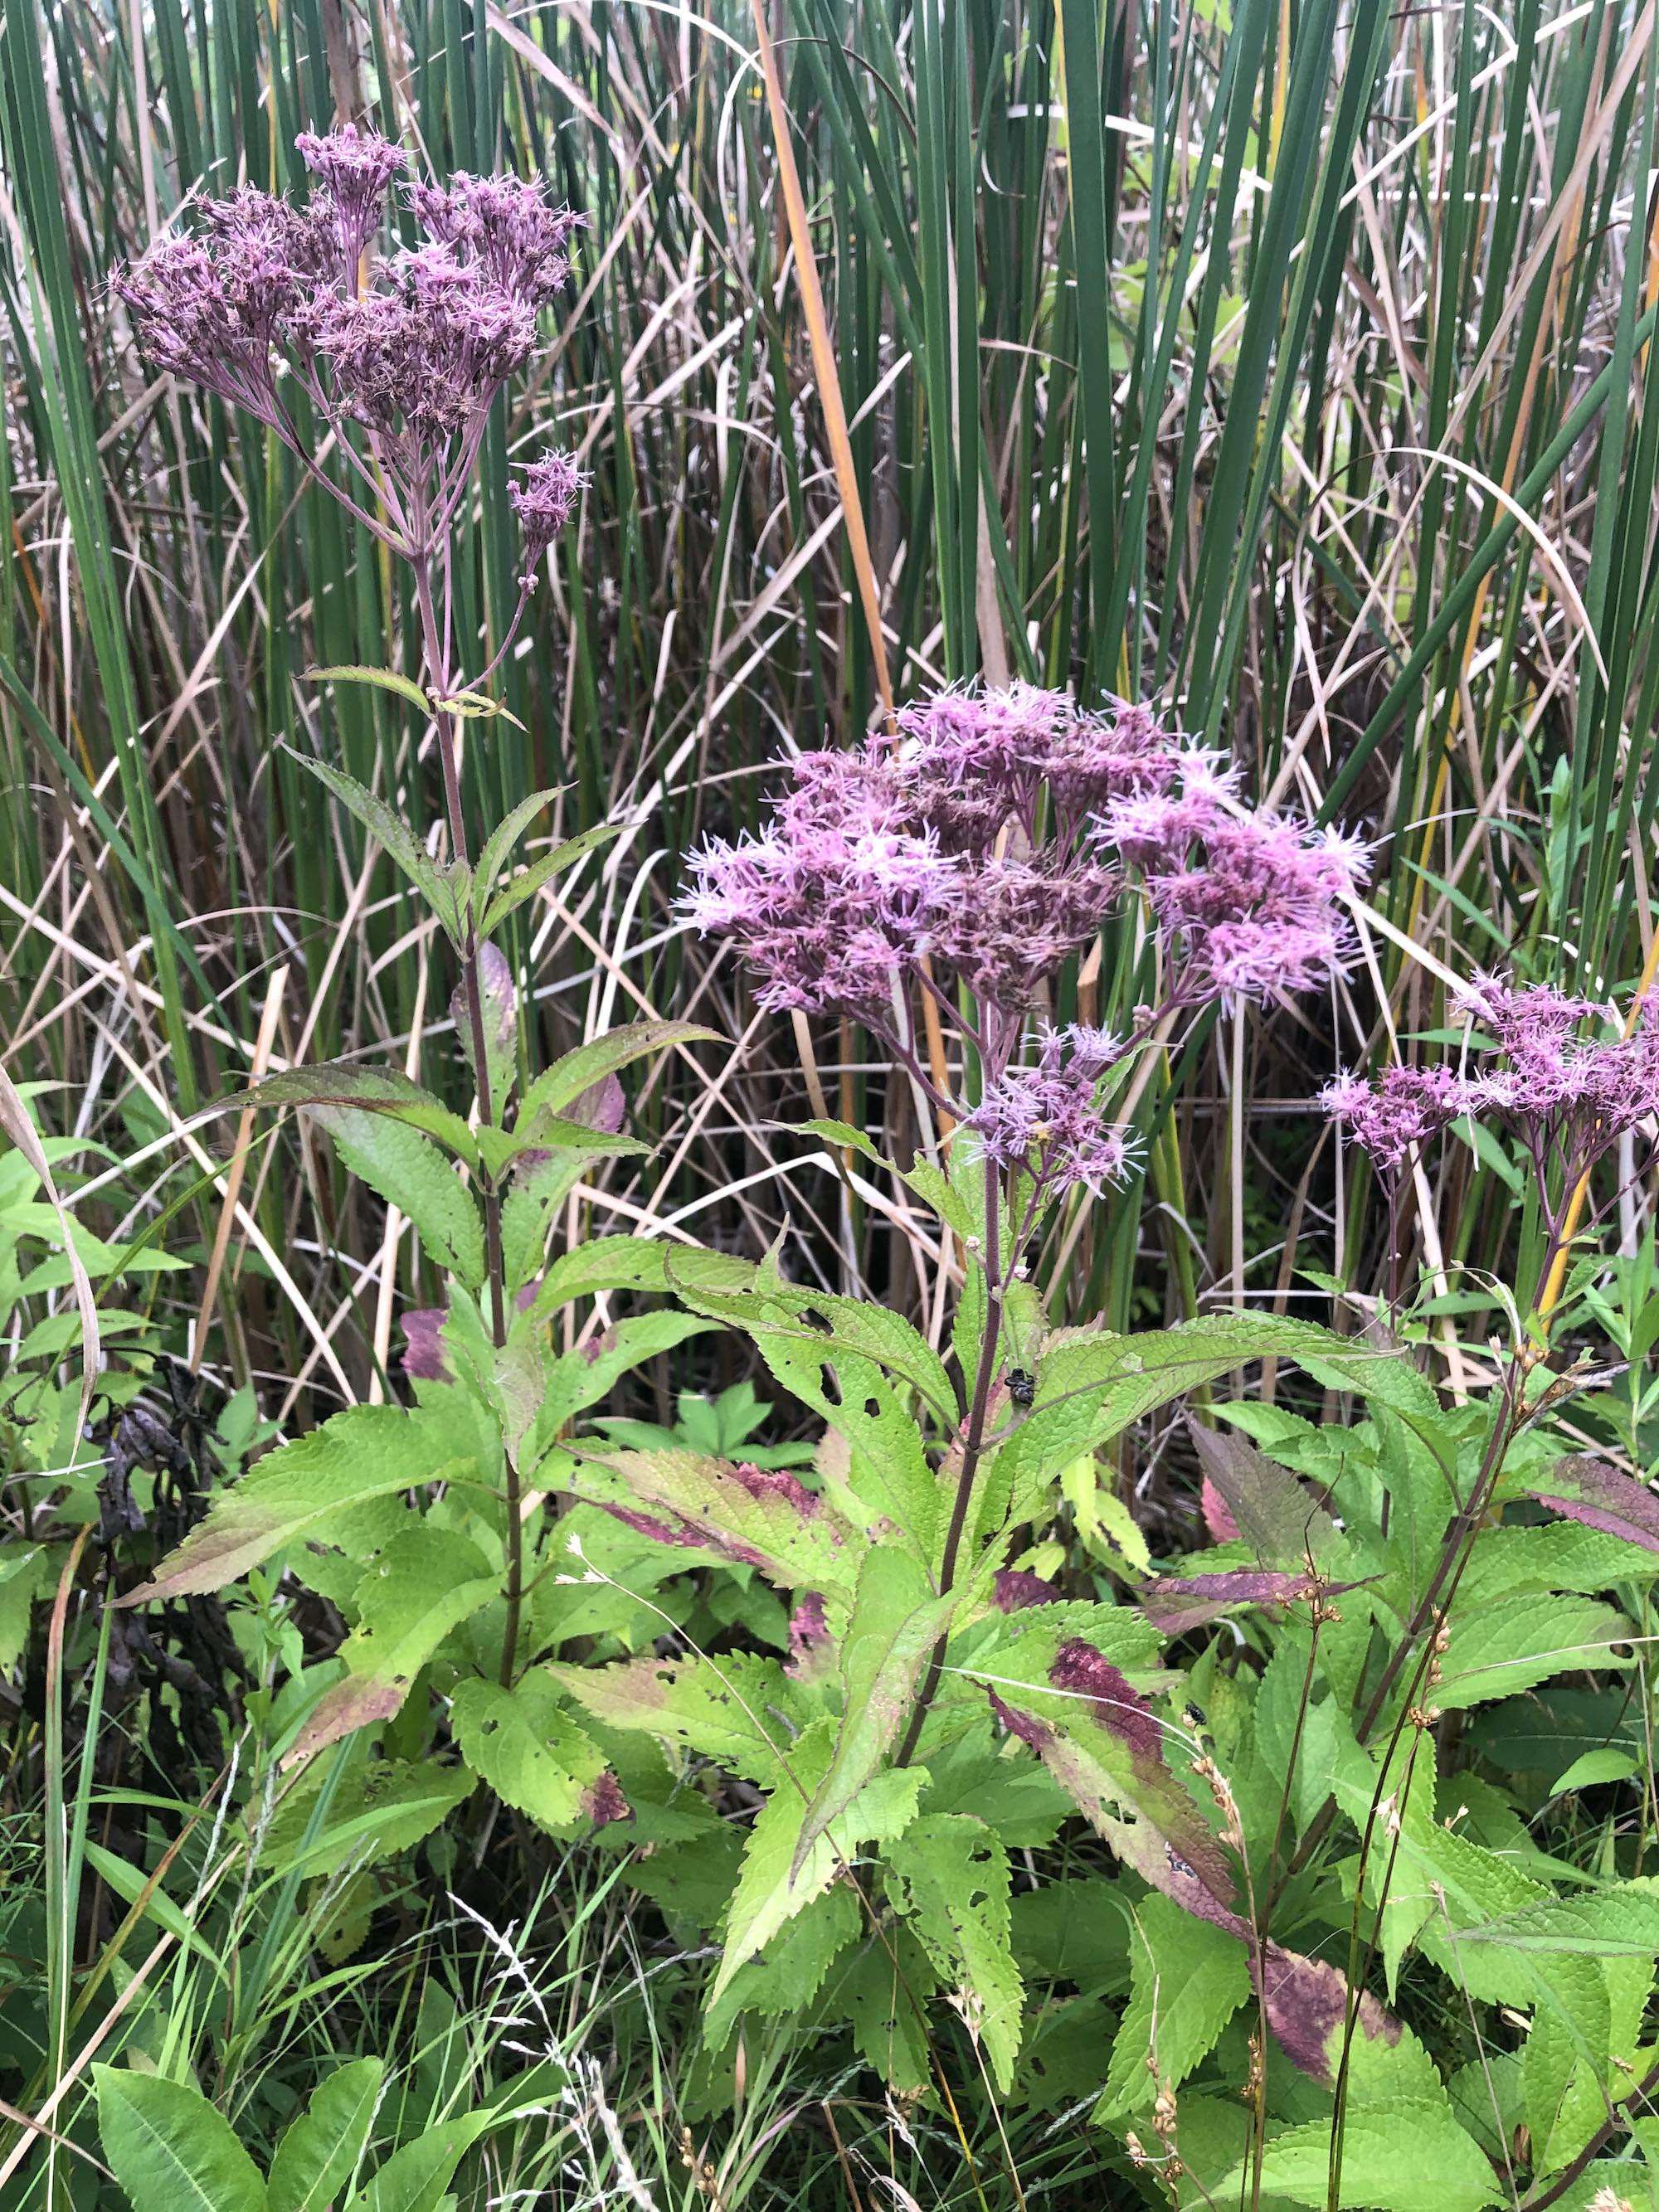 Spotted Joe-Pye Weed on shore of Lake Wingra on Arboretum Drive in Madison, Wisconsin on September 6, 2020.